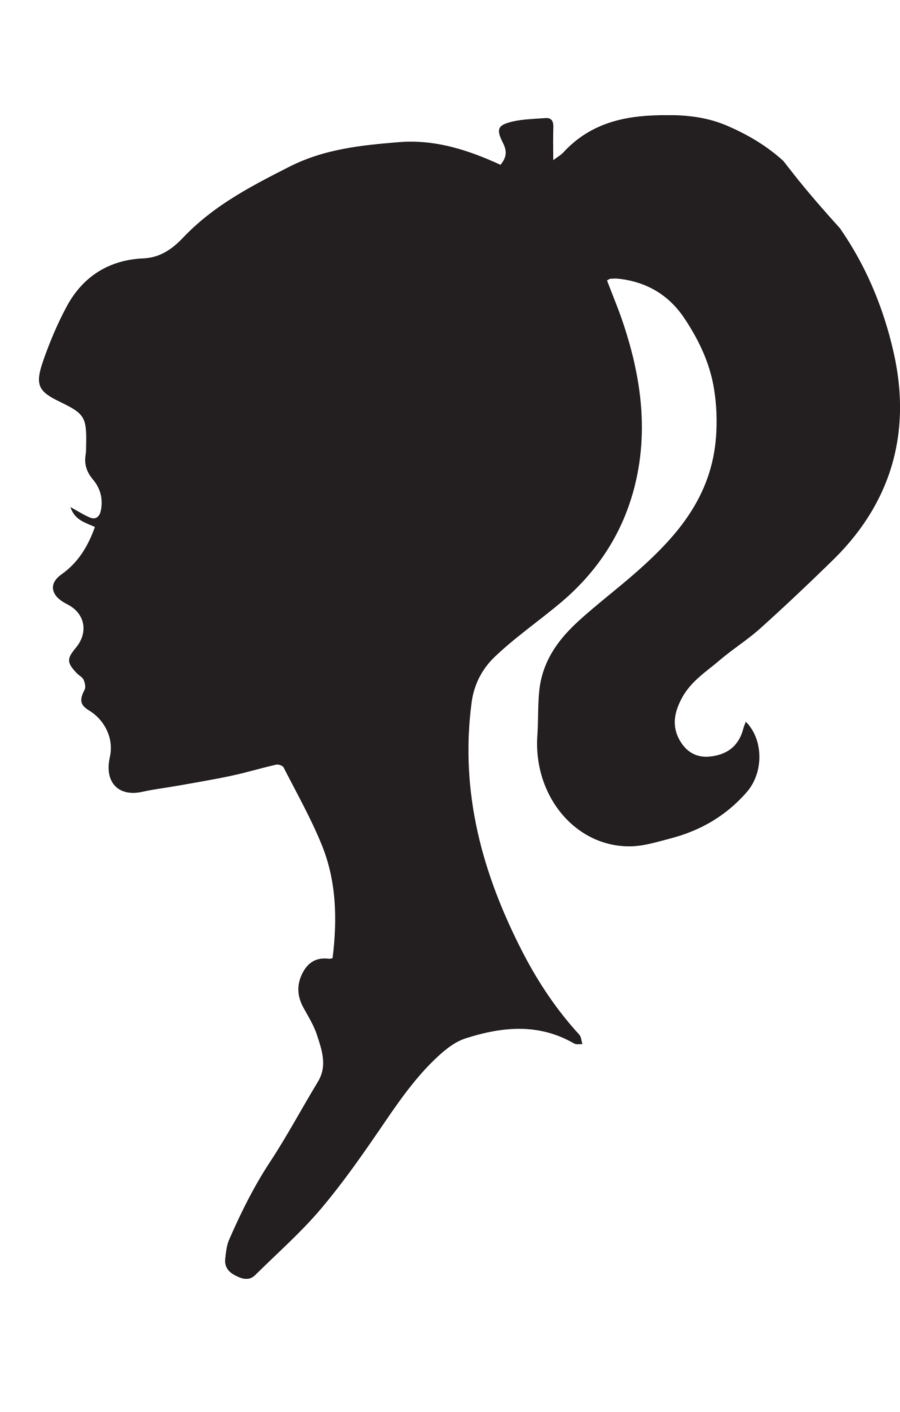 Male Profile Silhouette Images & Pictures - Becuo